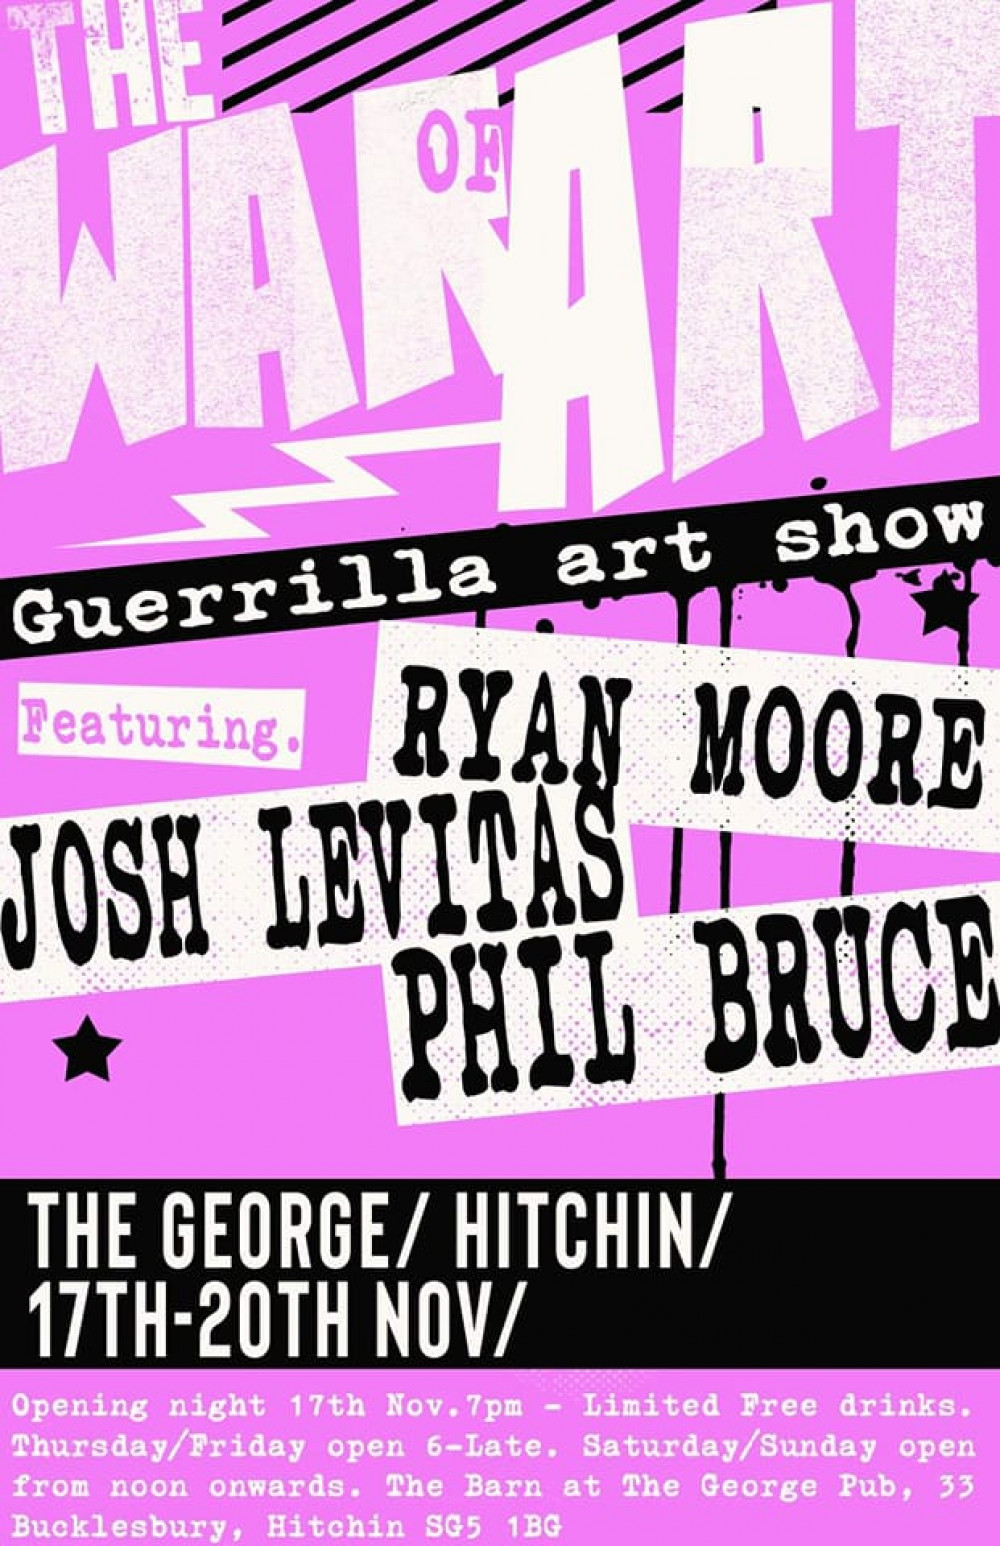 The War of Art - Guerrilla Art Show at the The George Pub: Find out more about this exciting Hitchin event 